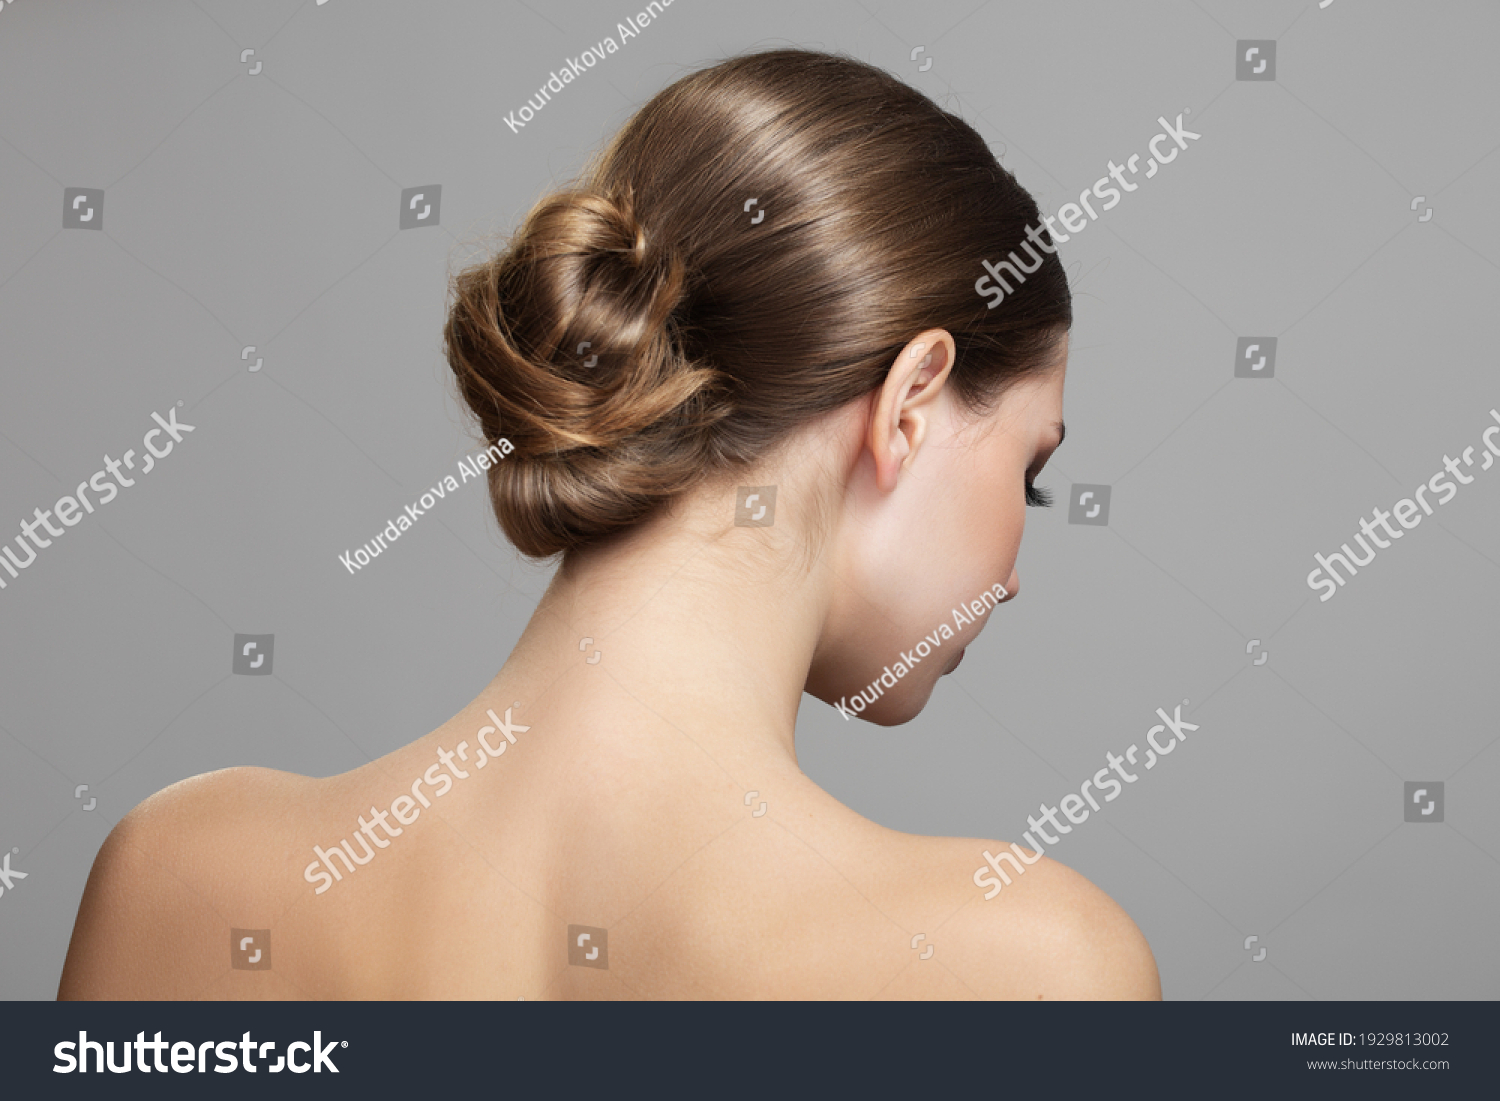 Woman with bun hairstyle on gray background. Bare back, shoulders and neck. Back view #1929813002